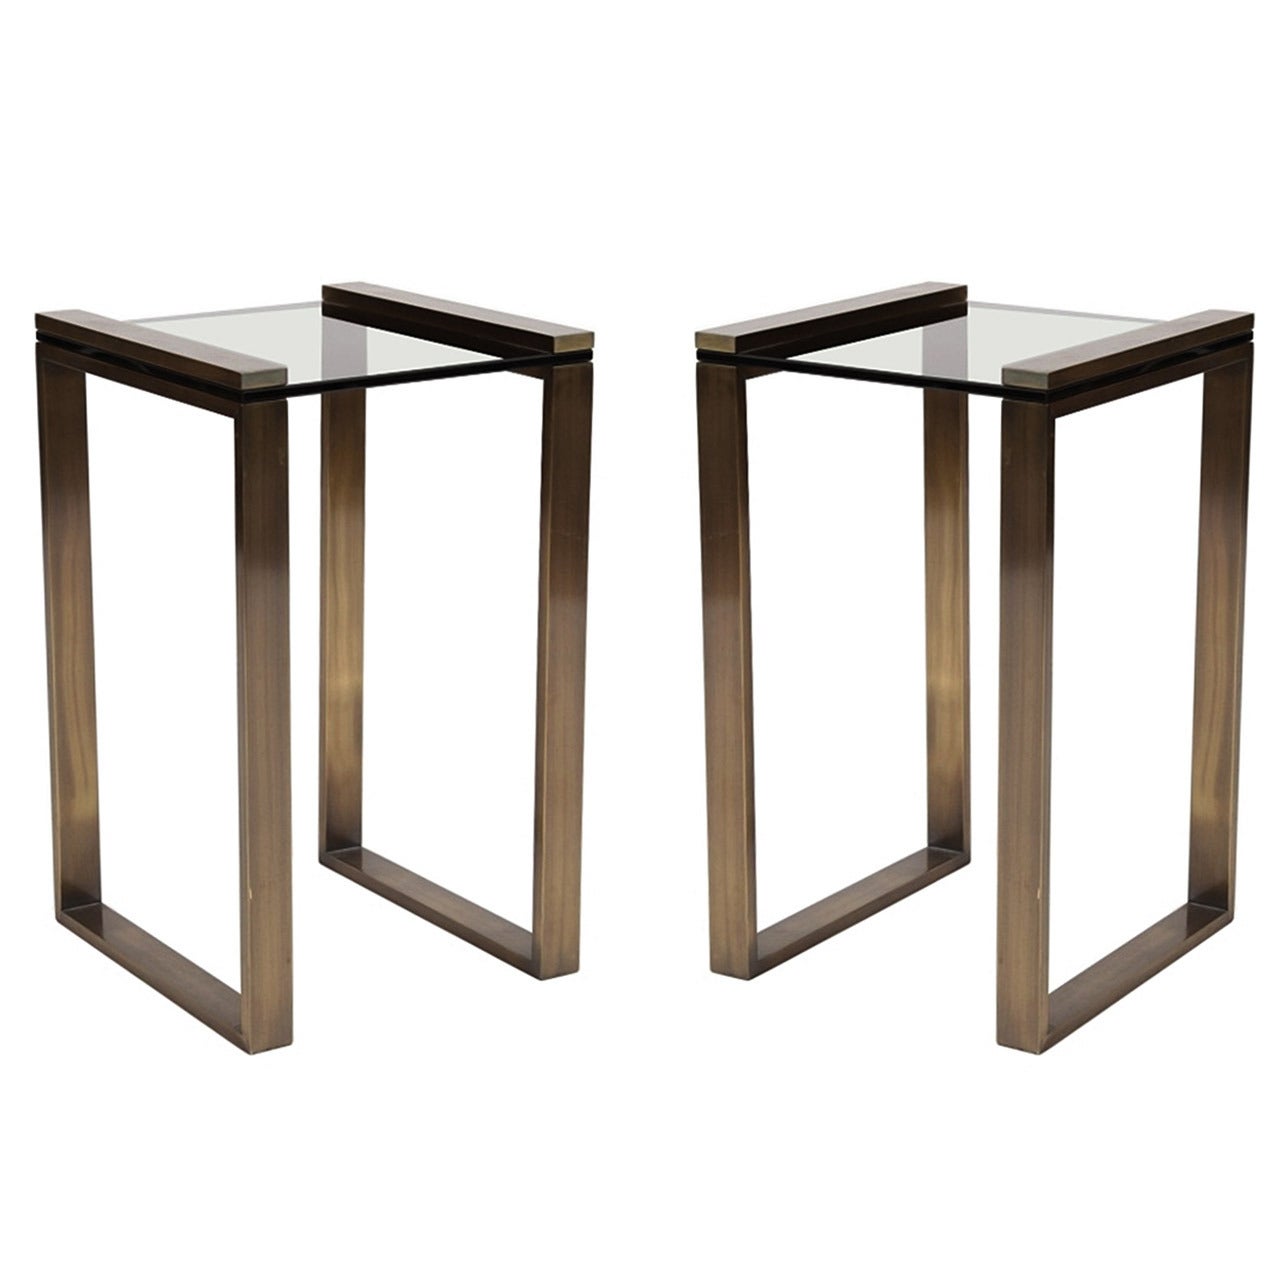 Charles Hollis Jones "Box Line" Side Tables in Lucite and Burnished Brass